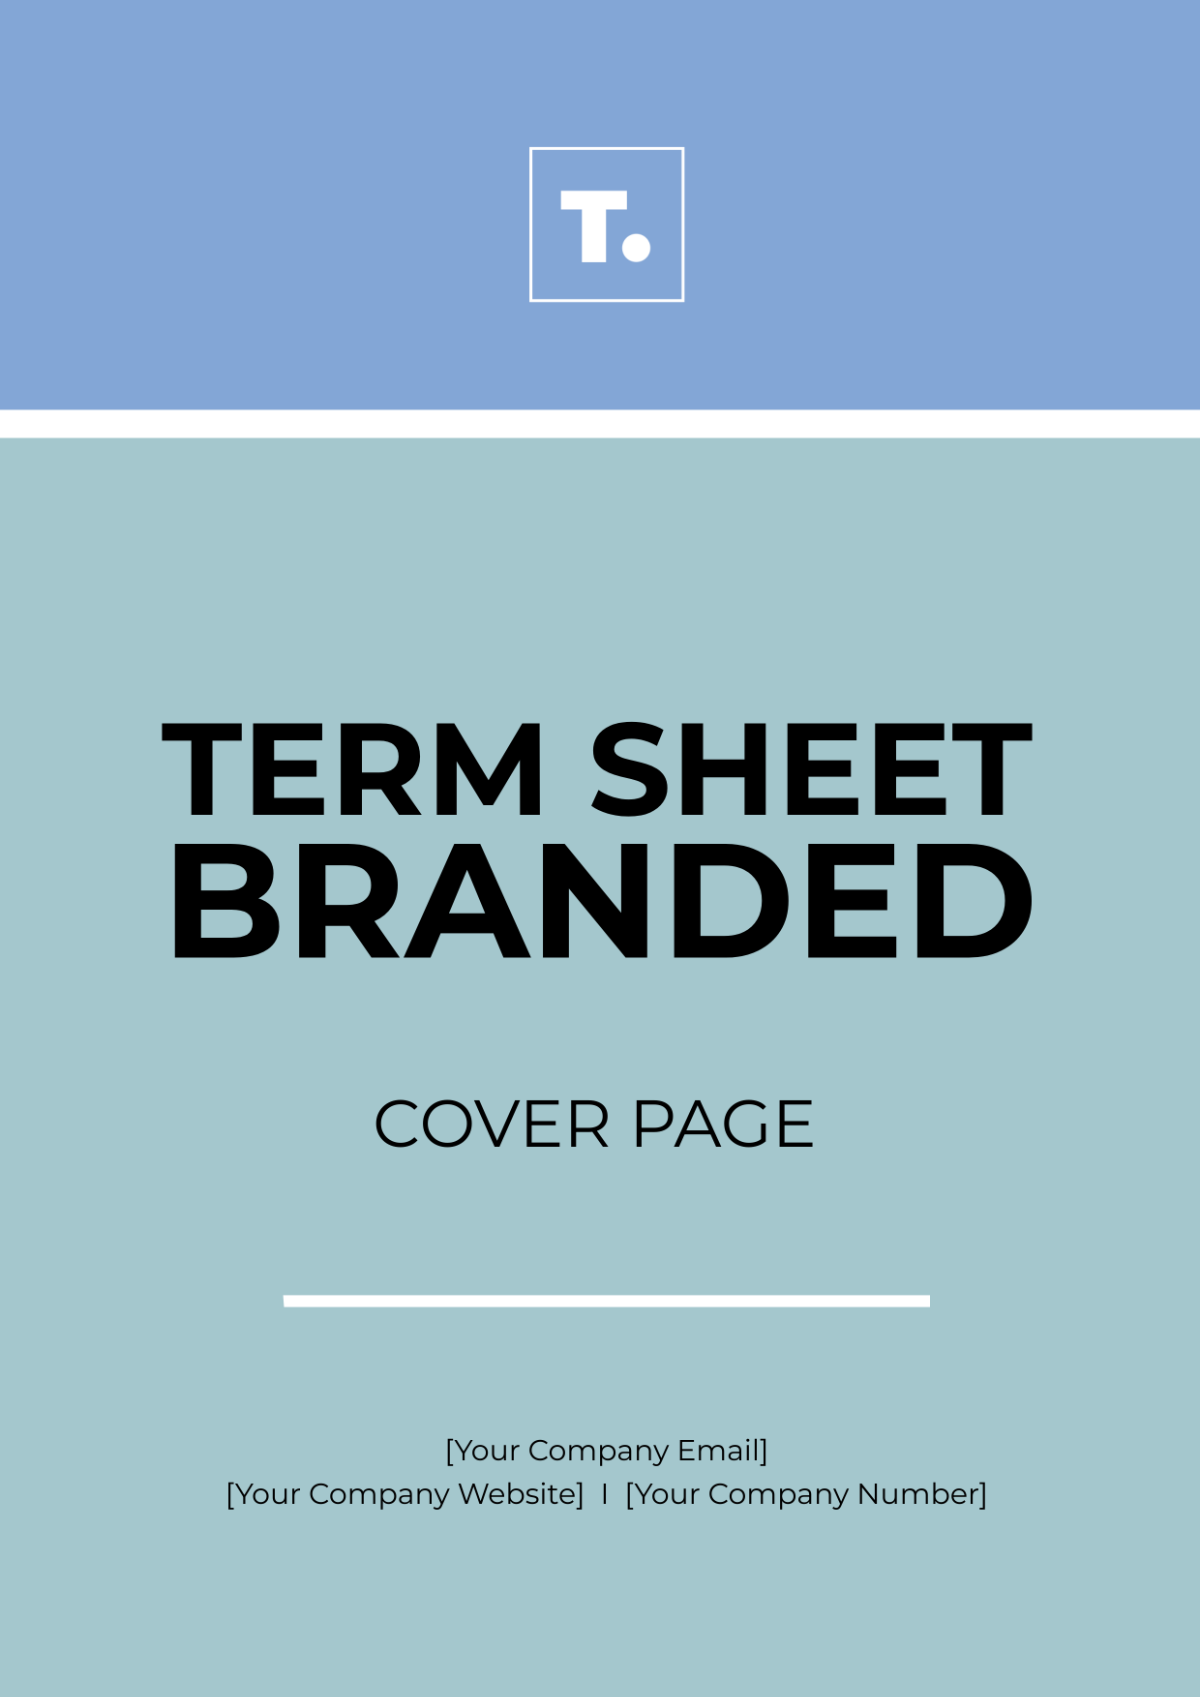 Term Sheet Branded Cover Page